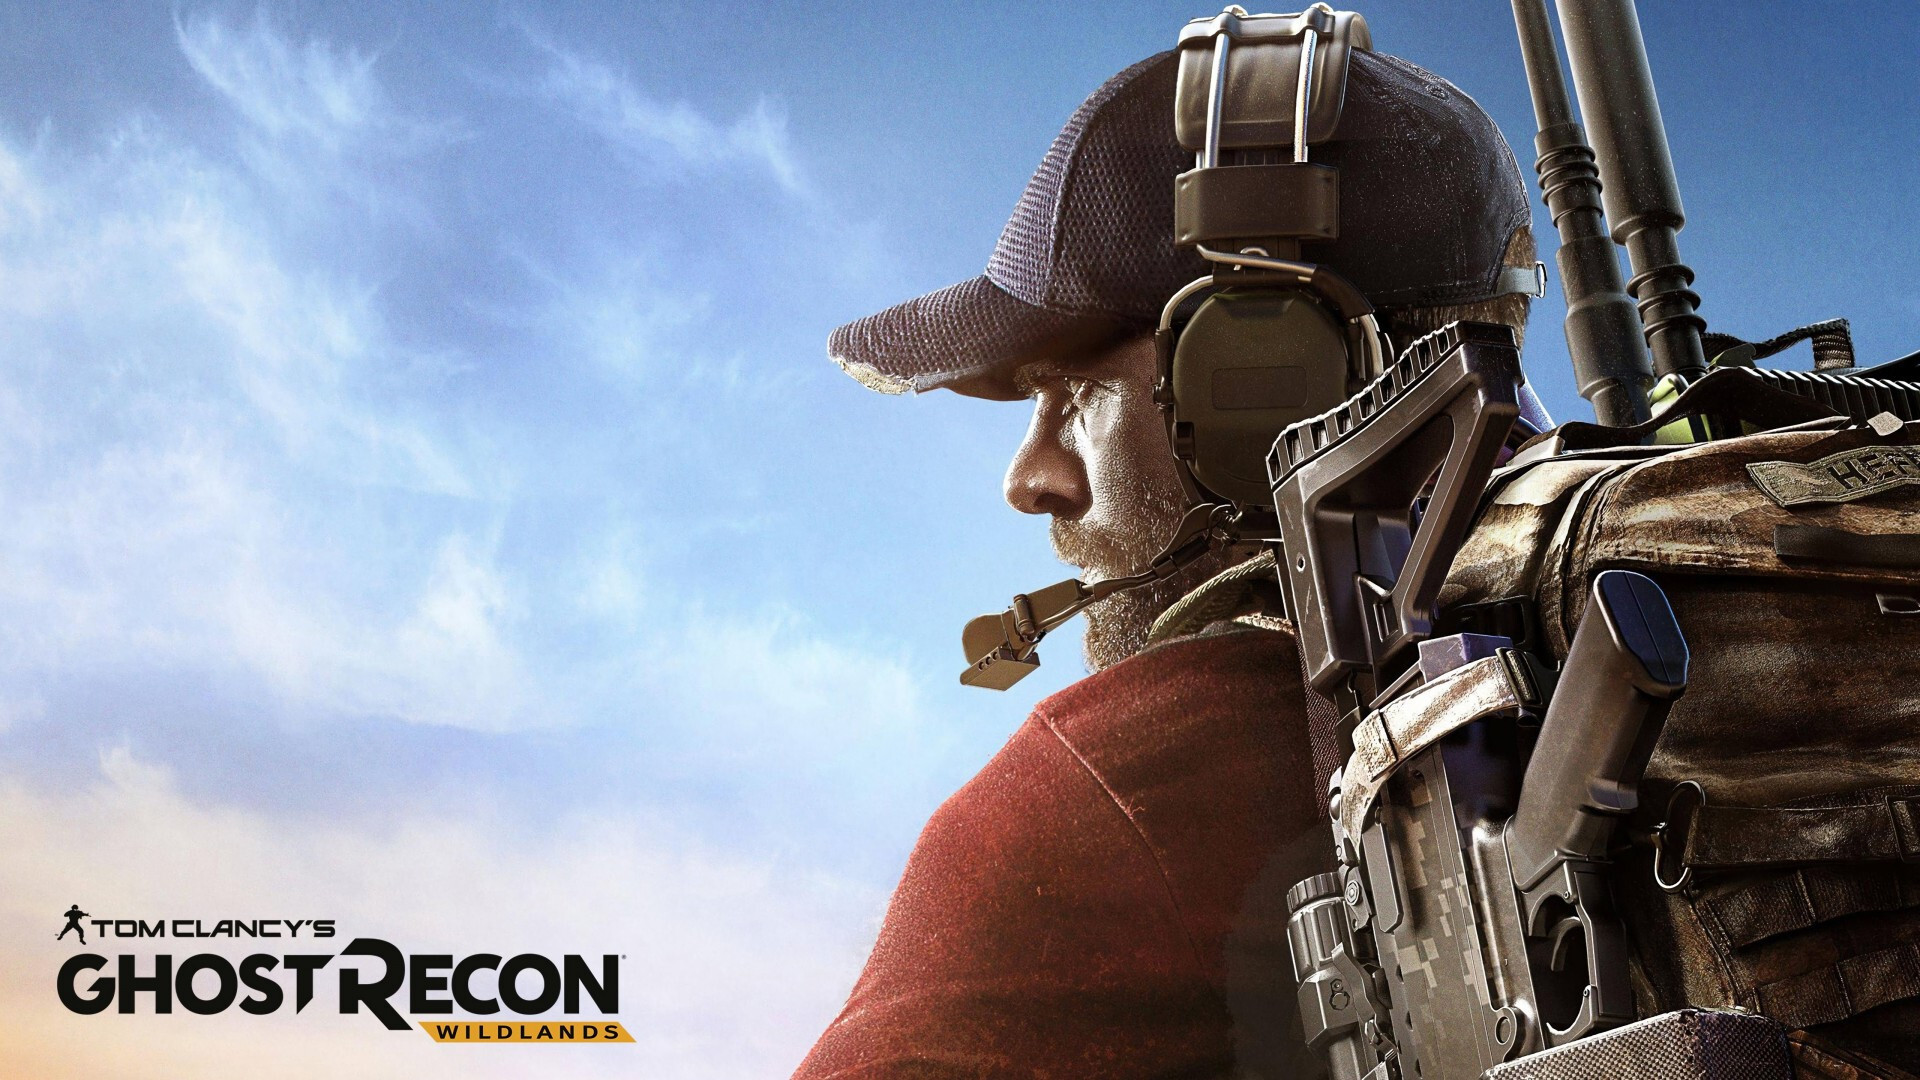 Ghost Recon: Wildlands: A third-person tactical shooter video game developed by Ubisoft Paris in collaboration with Ubisoft Bucharest. 1920x1080 Full HD Background.